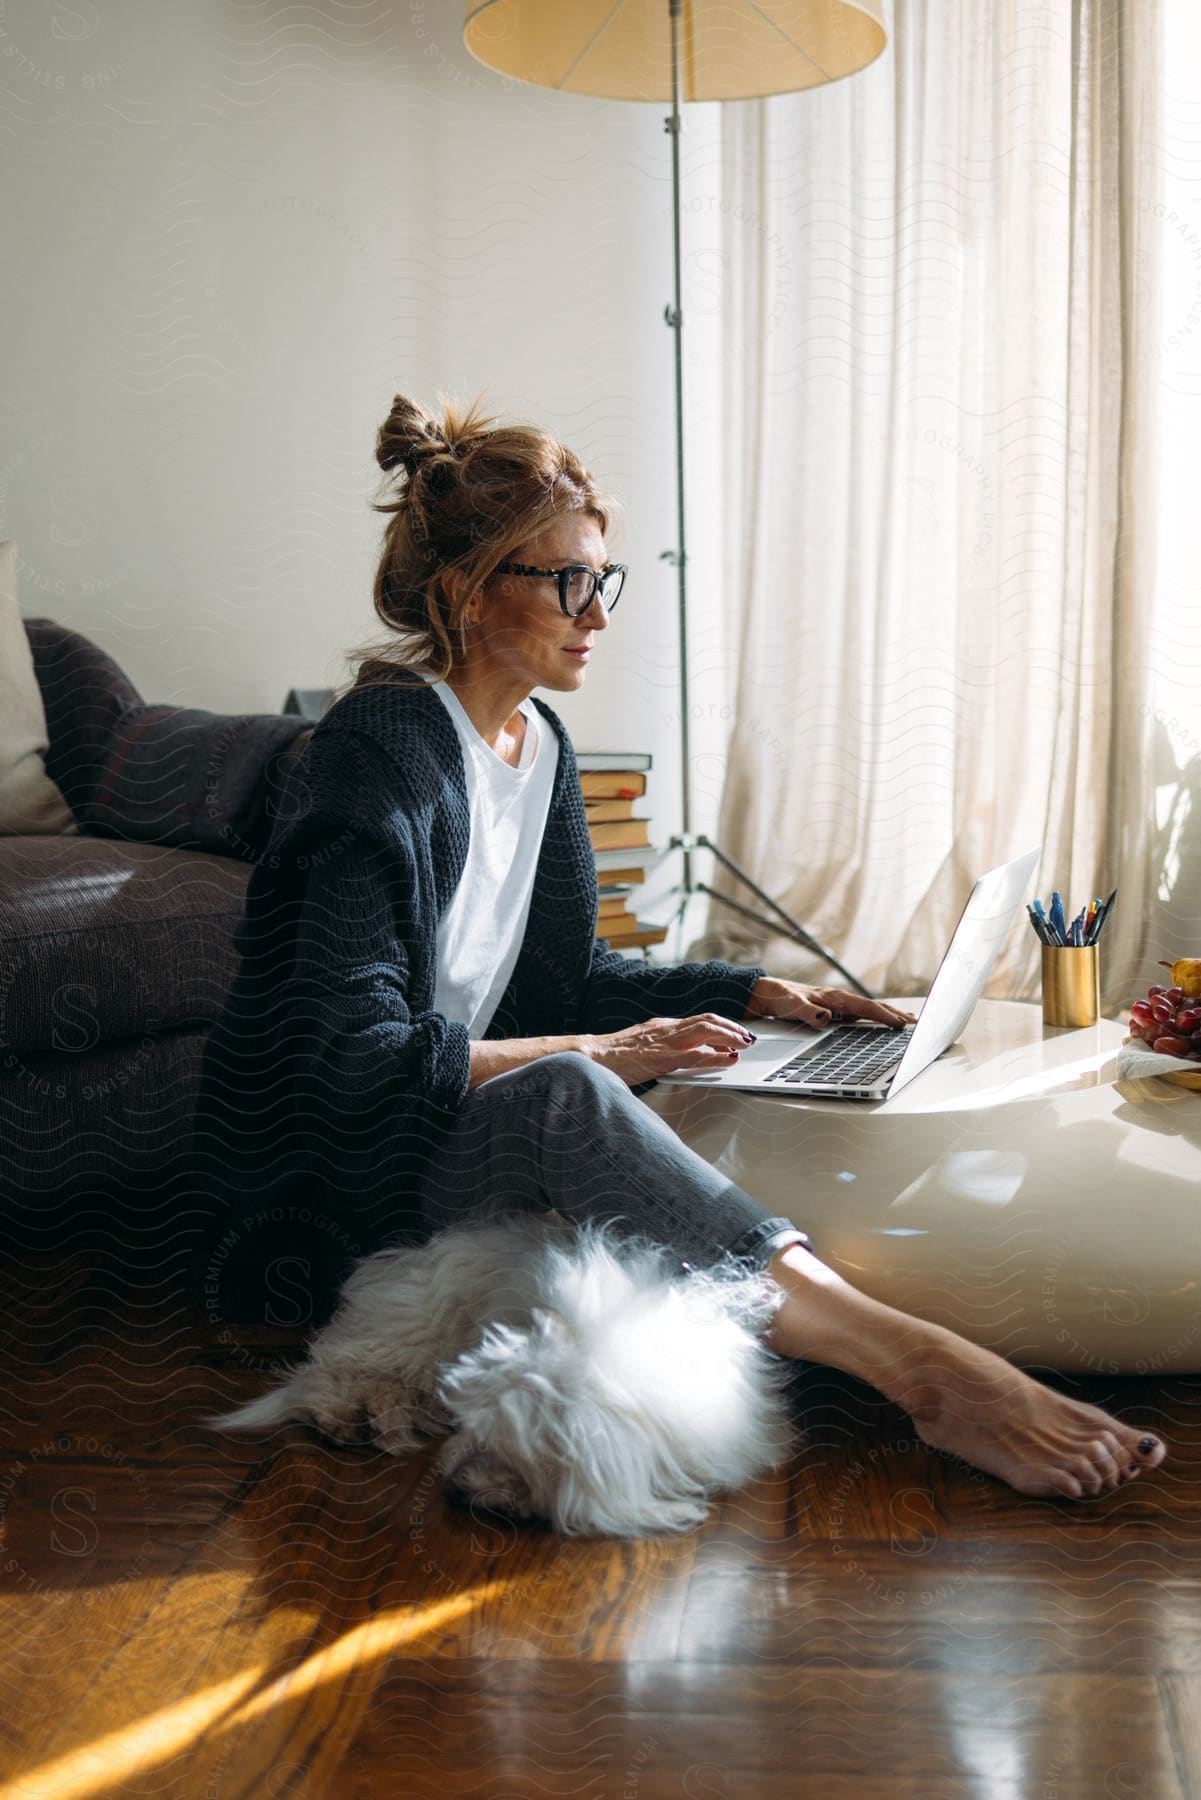 Woman sitting on her living room floor typing on a laptop computer as her dog lies next to her